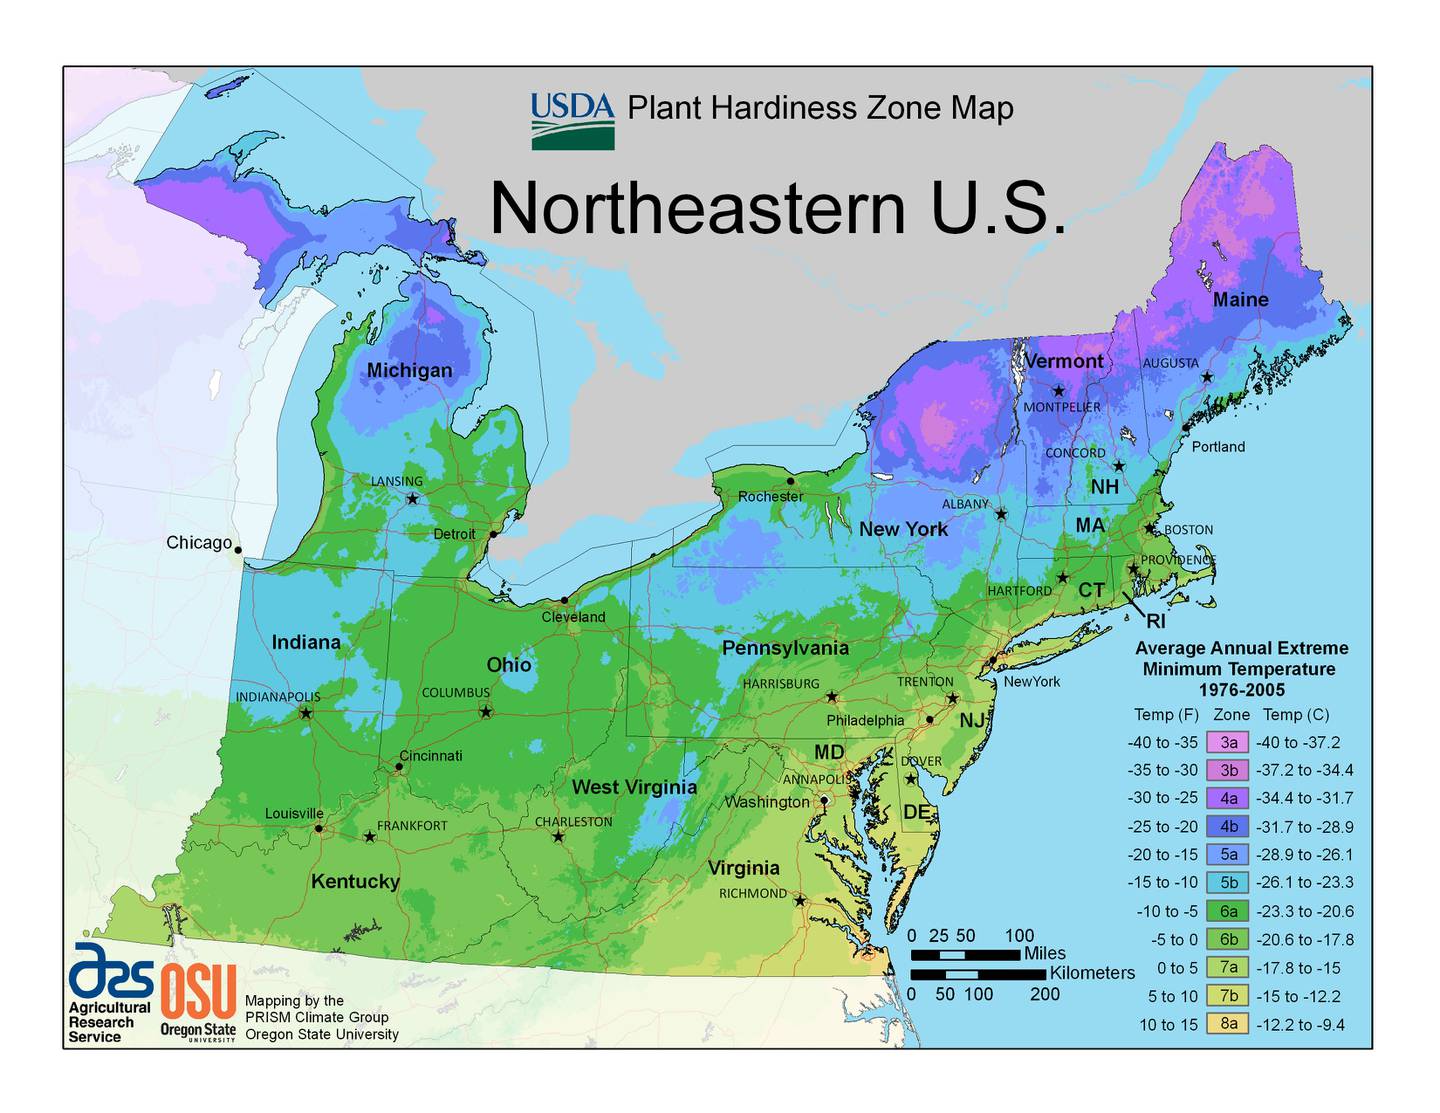 The USDA plant hardiness zone map for the north east.